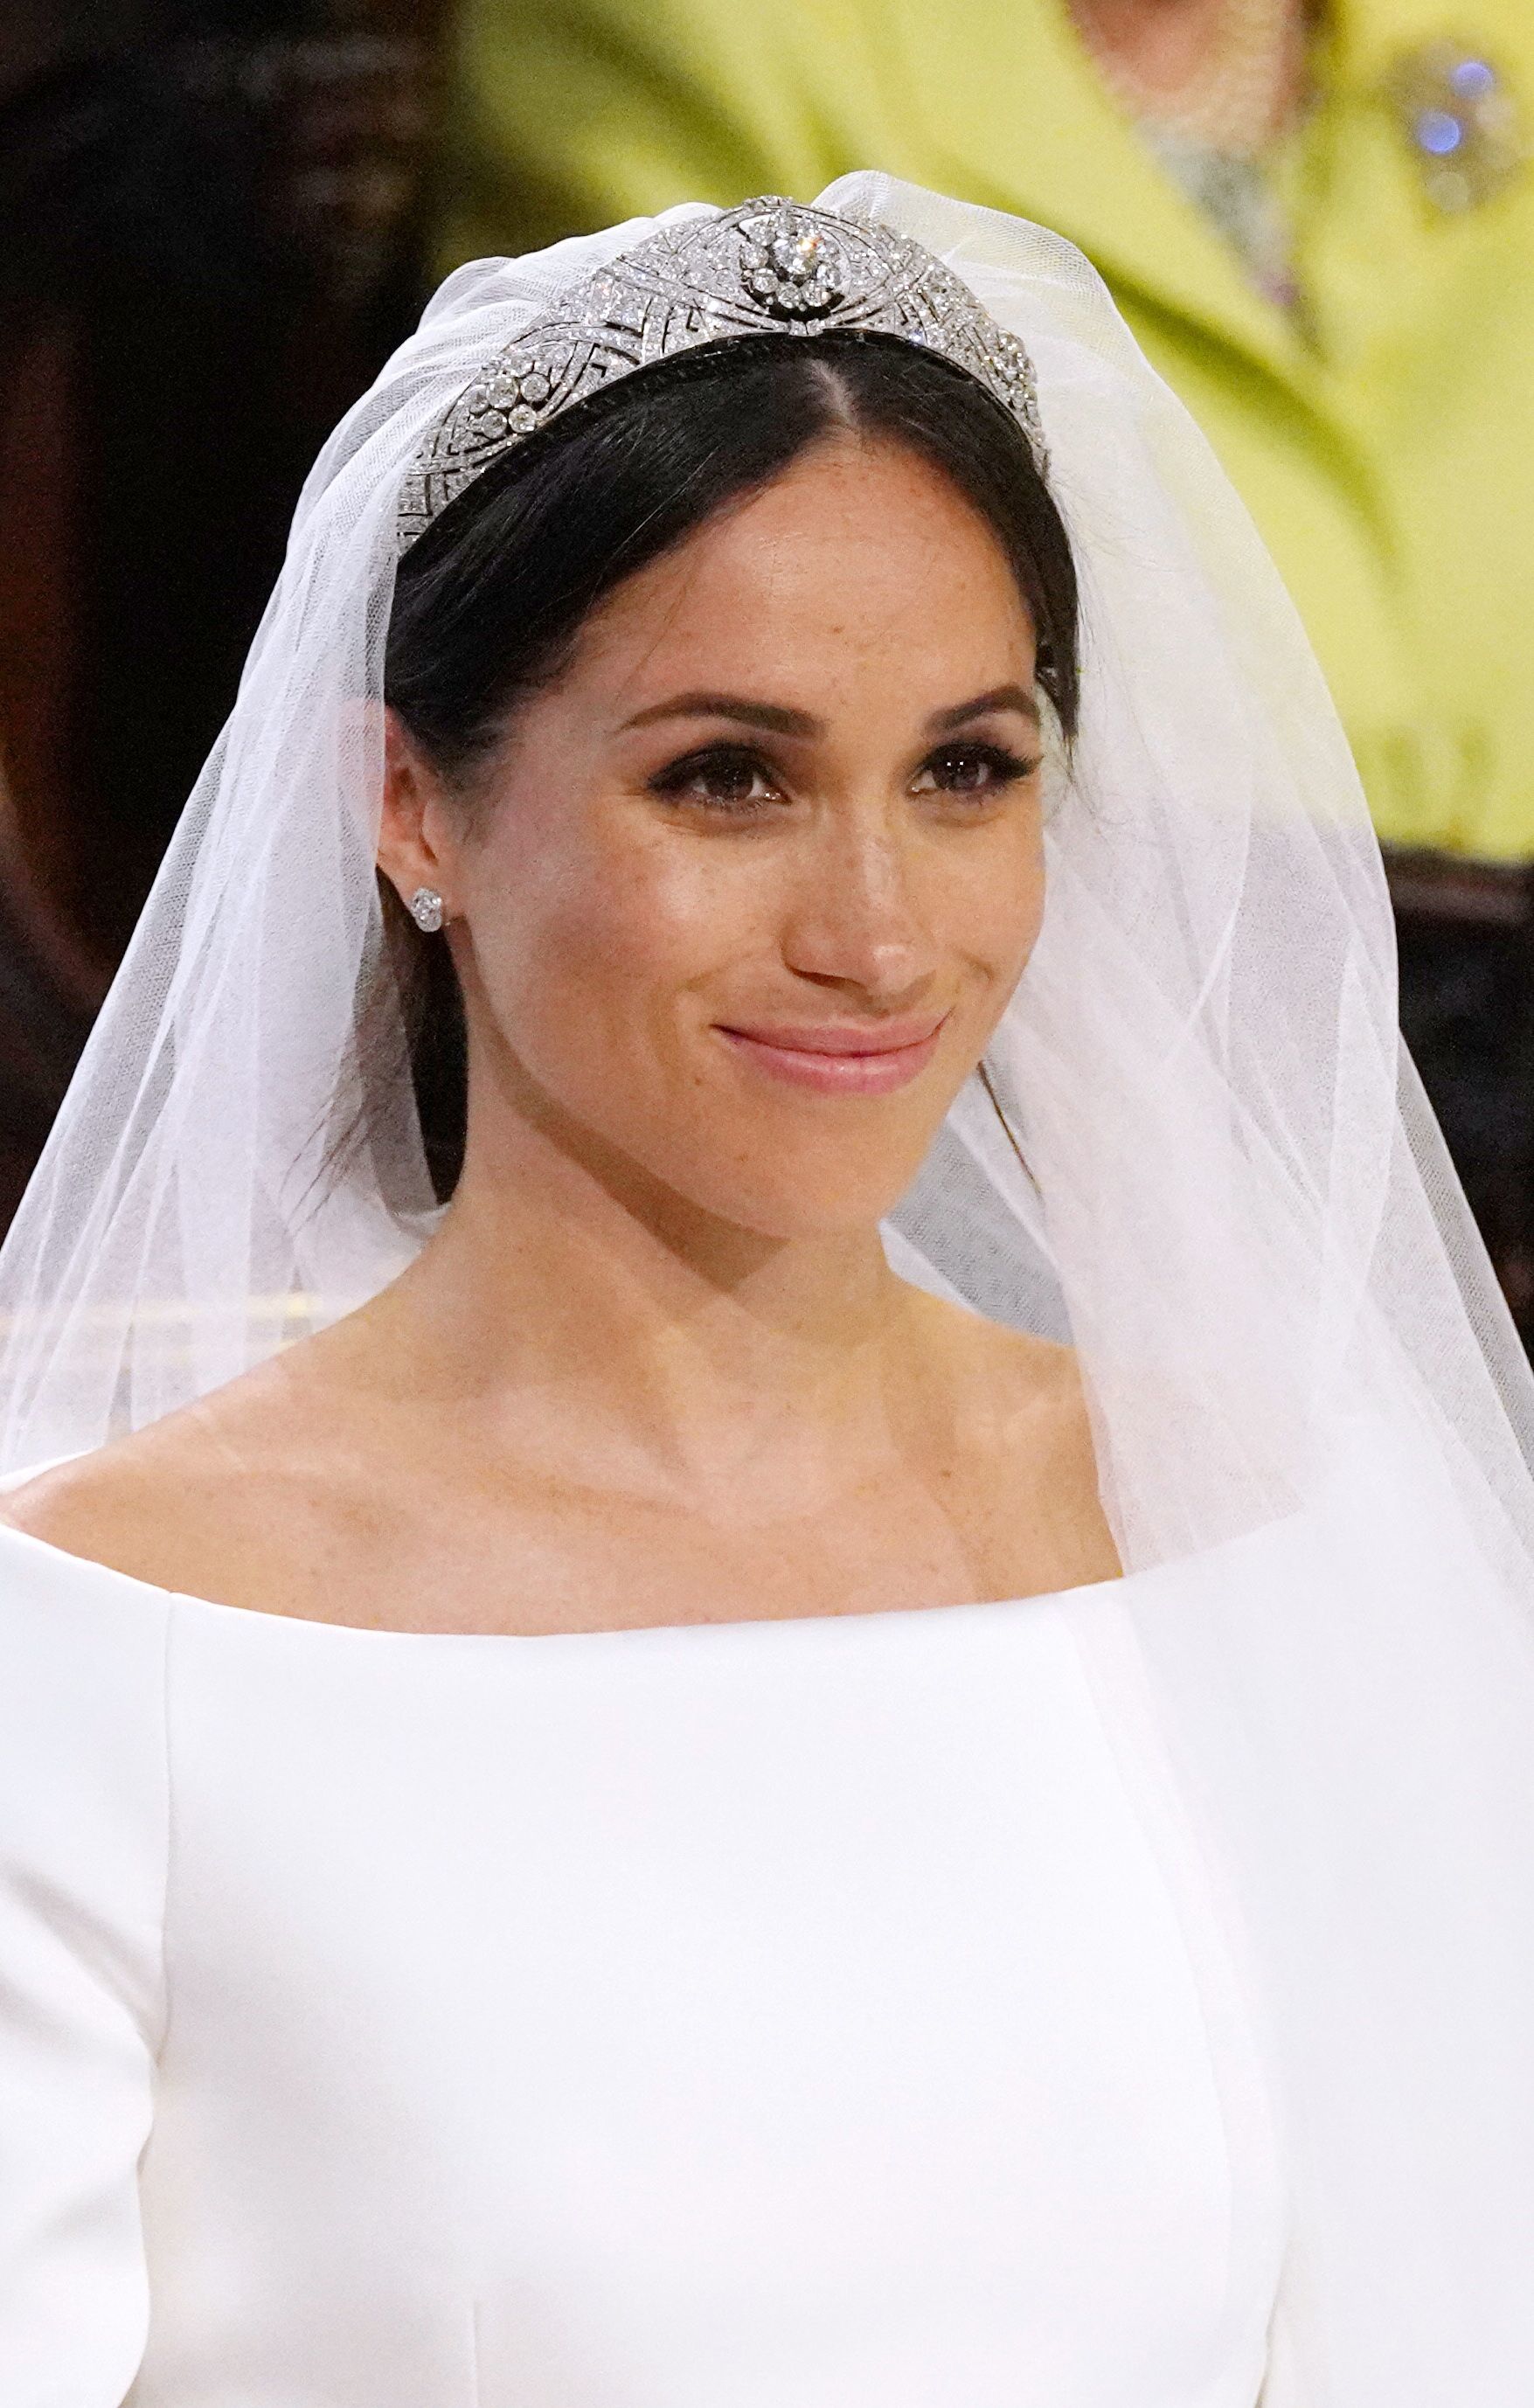 See Meghan Markle's First Wedding Dress | Closer Weekly